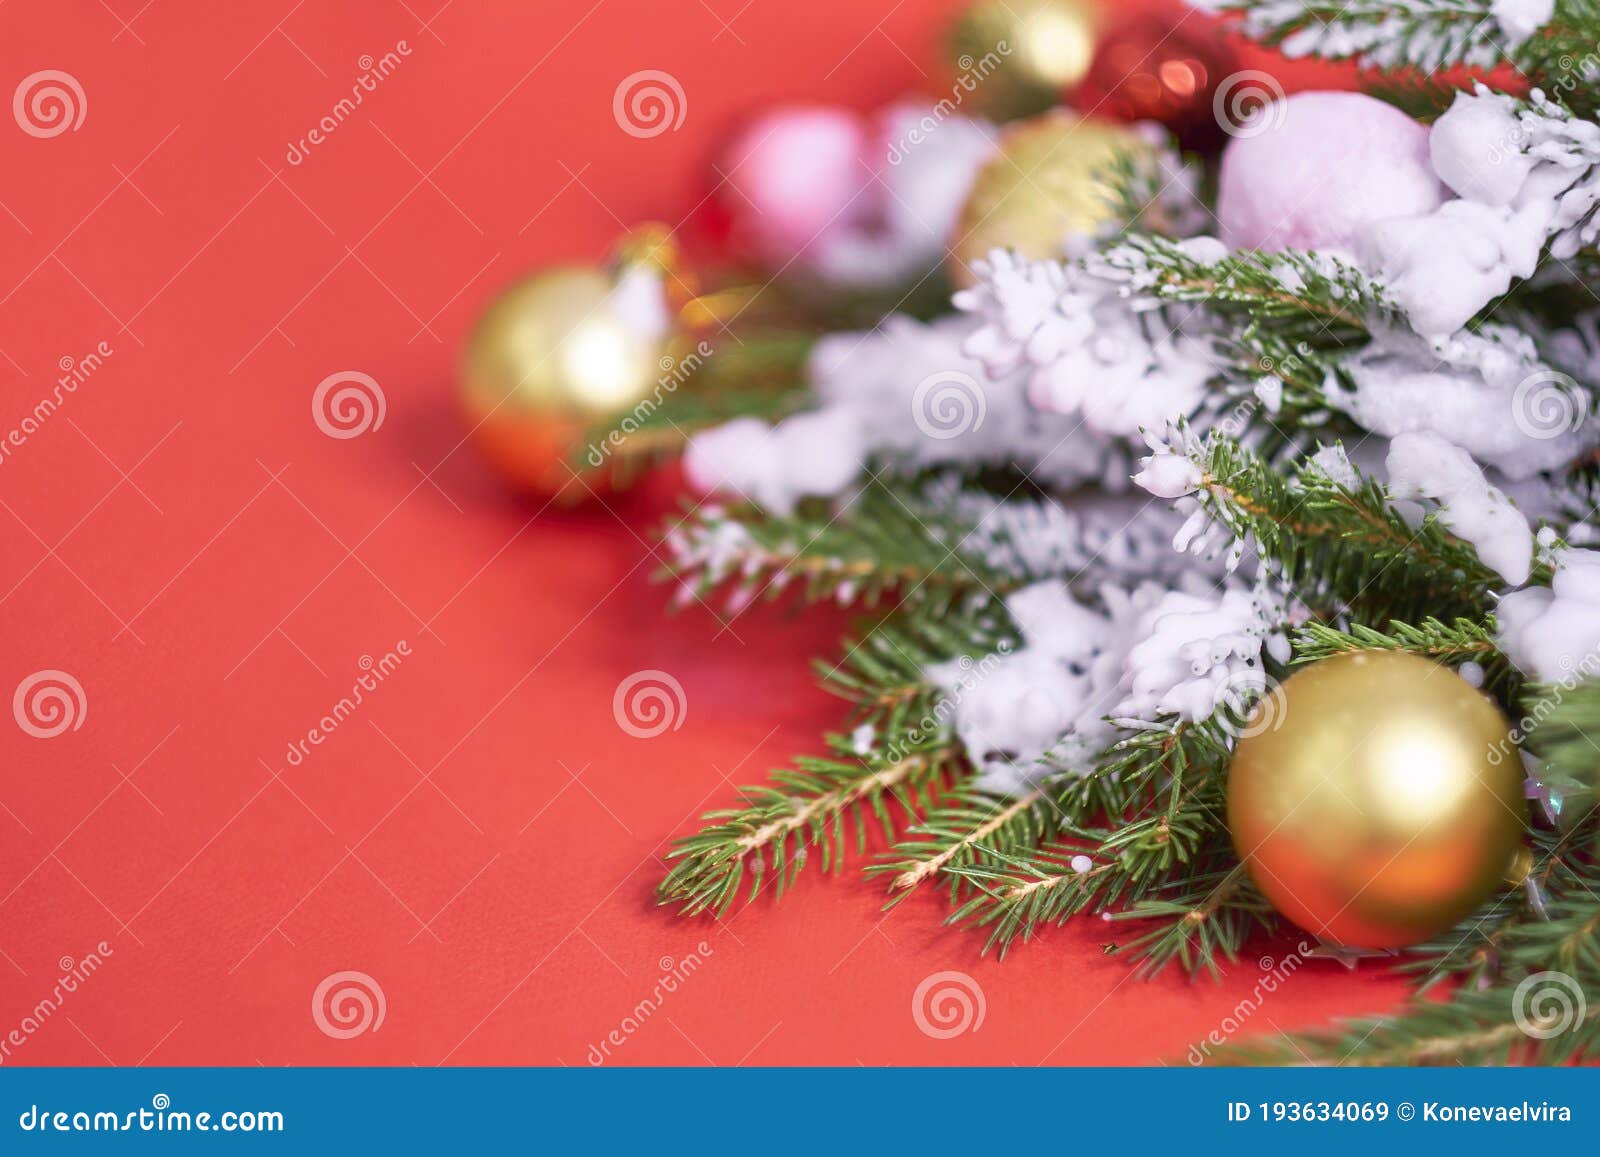 Christmas Banner. Xmas Design Red Christmas Tree Decorations on a Red ...